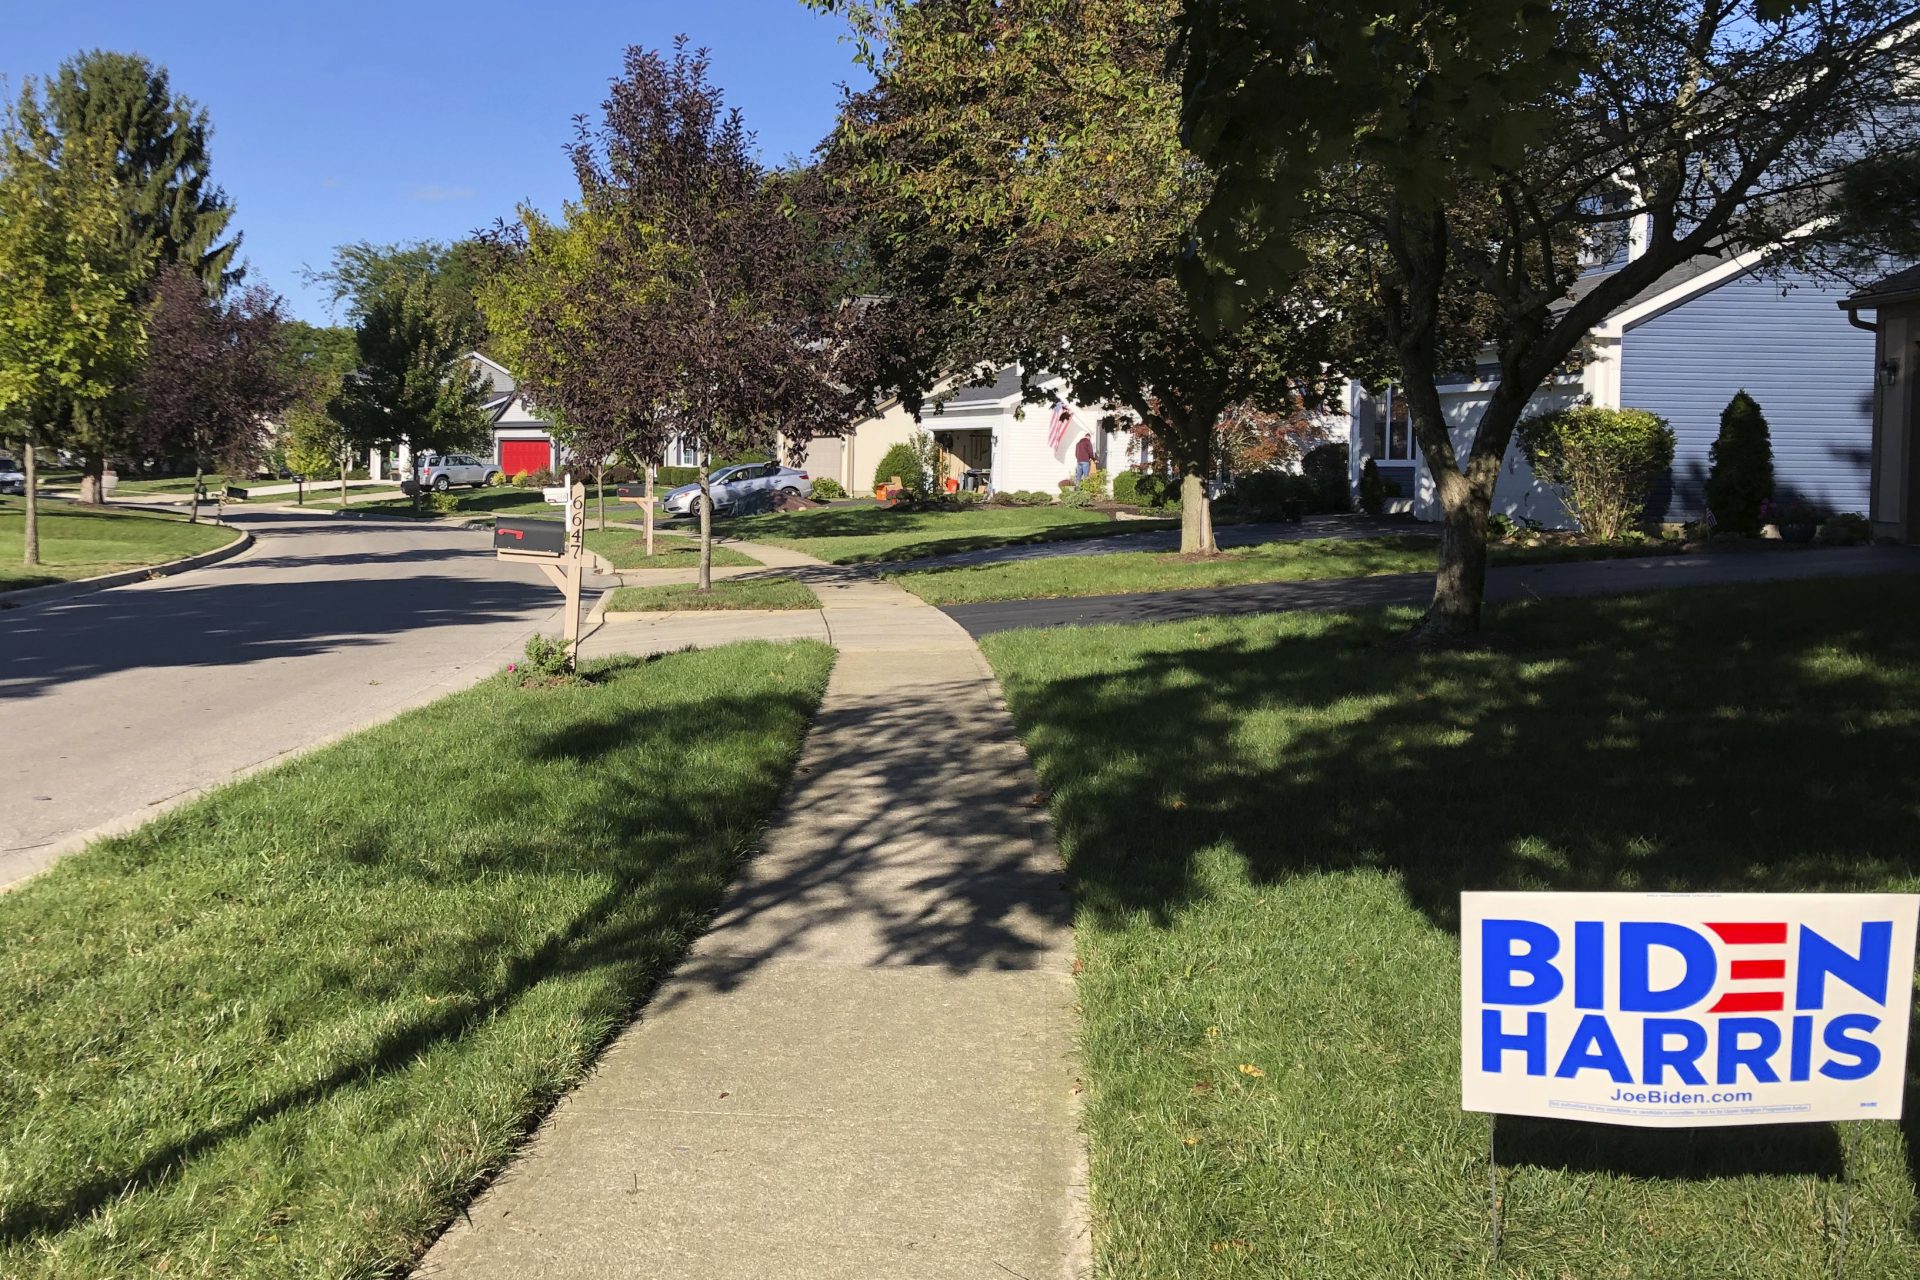 A Biden for President sign in a lawn of suburban Dublin, Ohio, on Friday, Sept. 18, 2020. In the campaign for House control, some districts are seeing a fight between Democrats saying they'll protect voters from Republicans willing to take their health coverage away, while GOP candidates are raising specters of rioters imperiling neighborhoods if Democrats win.